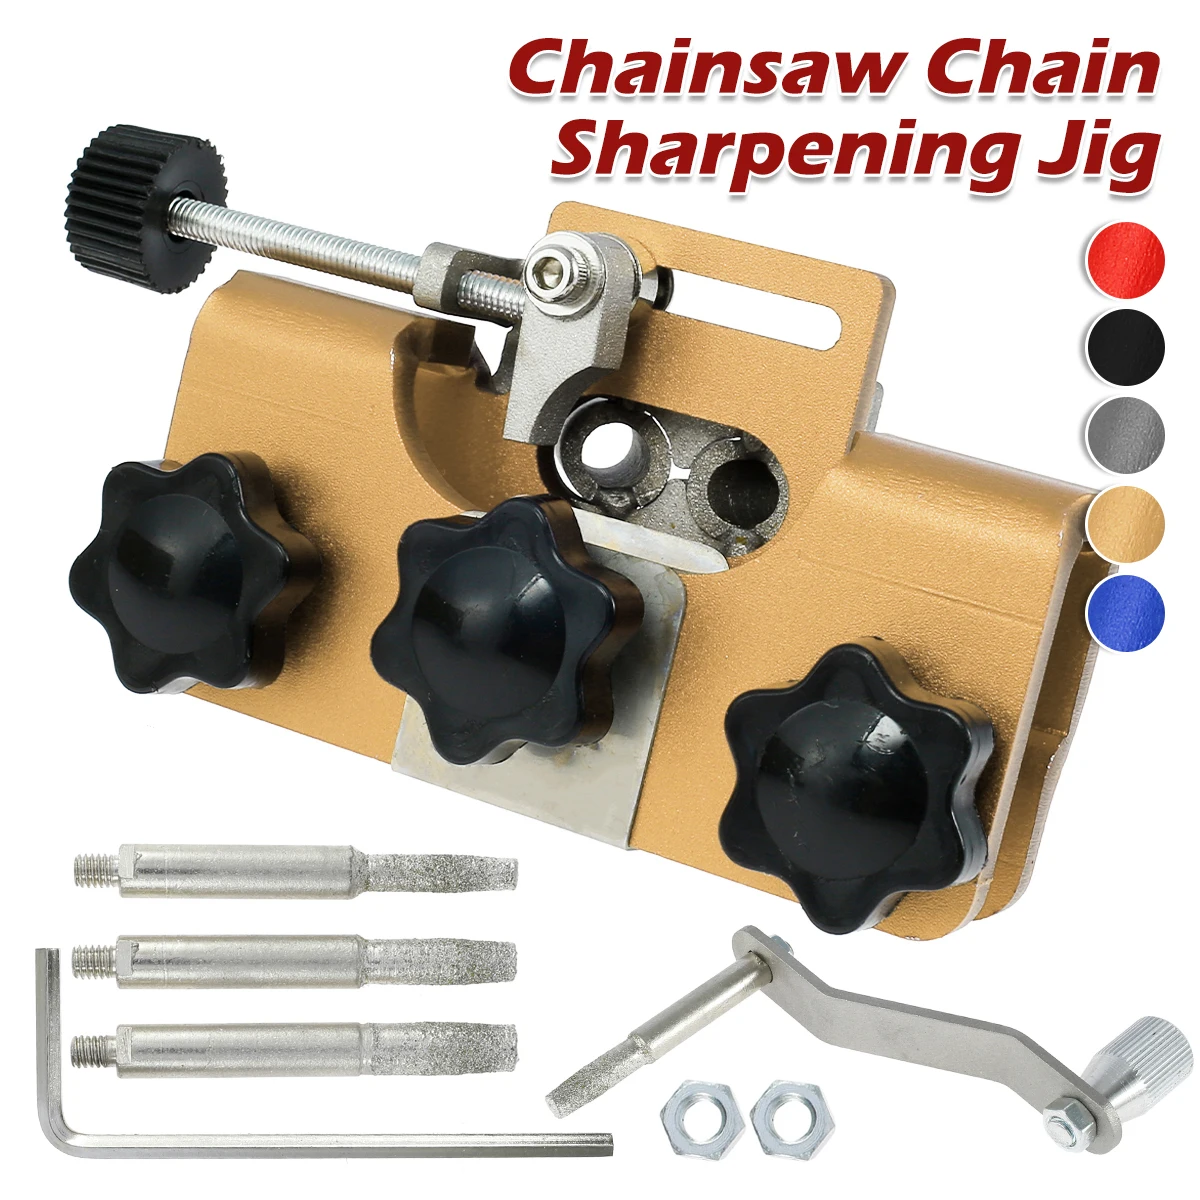 Portable Chainsaw Sharpener Jig Manual Chainsaw Chain Sharpening For Most Chain Saws And Electric Saws With Sharpening Heads